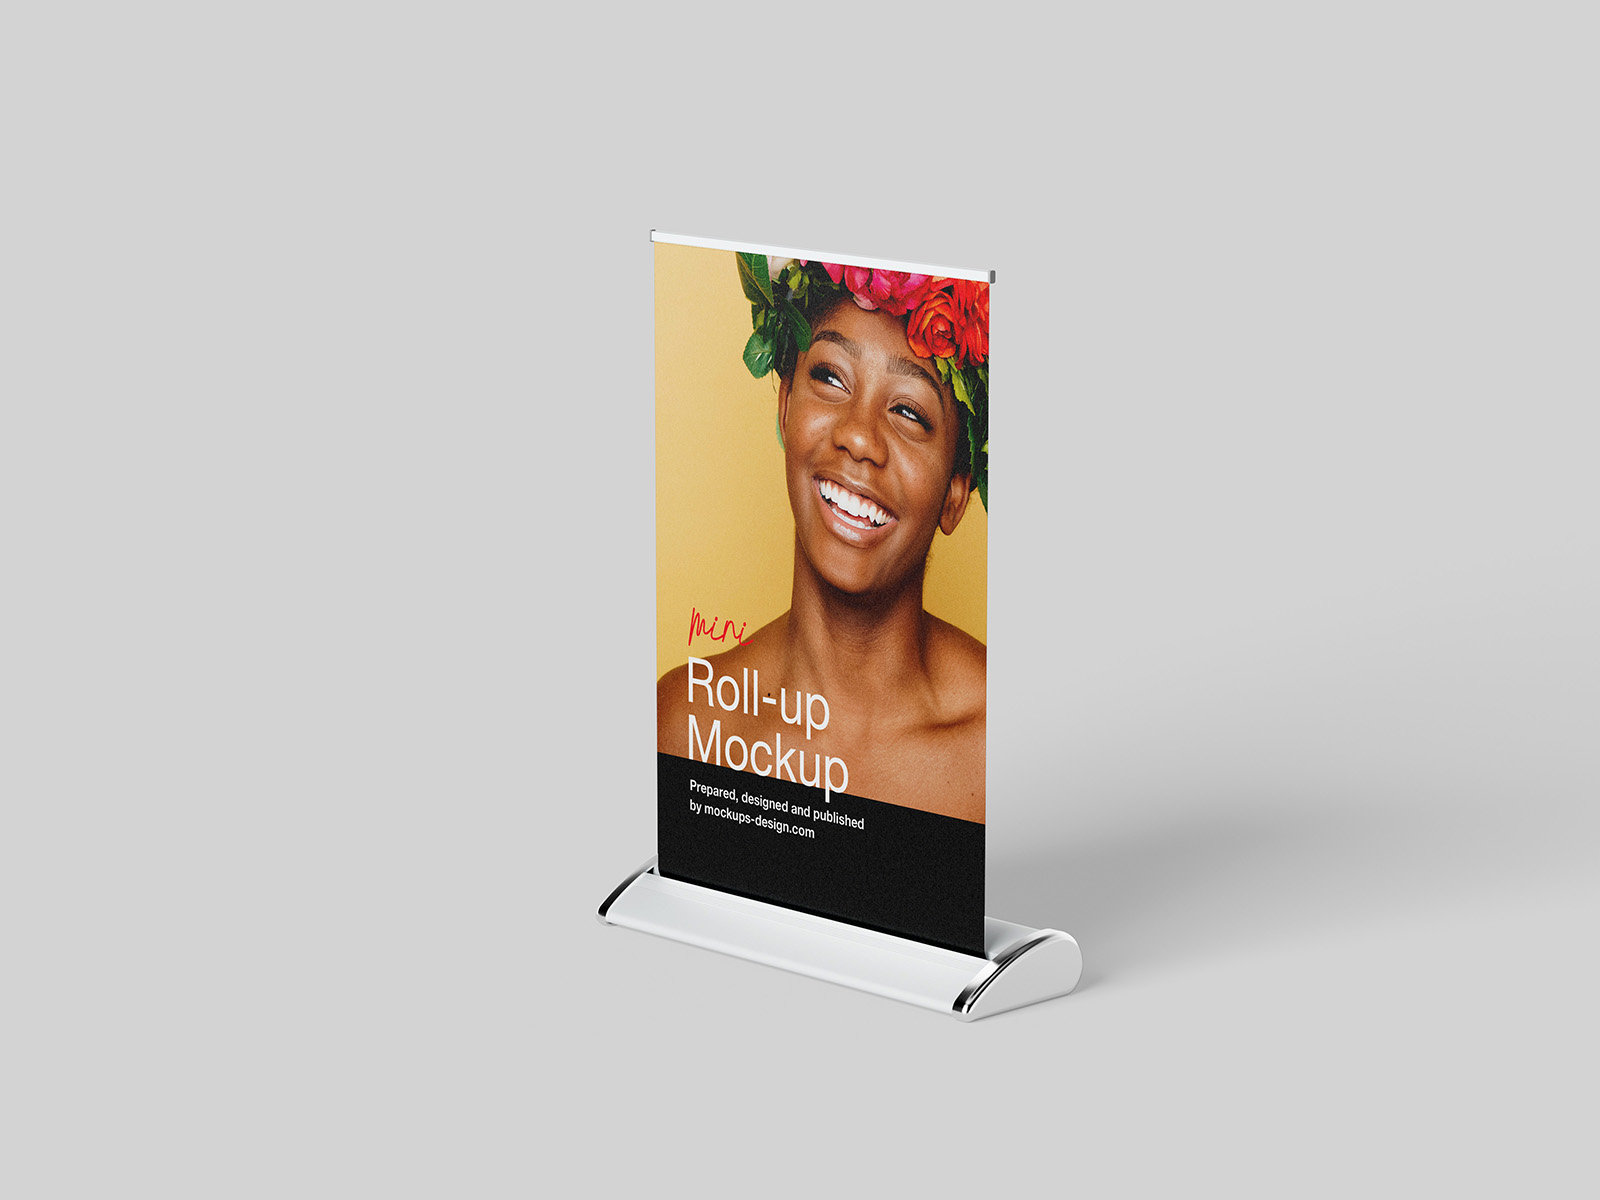 Various Sights of 3 Roll-up Banner Mockups FREE PSD